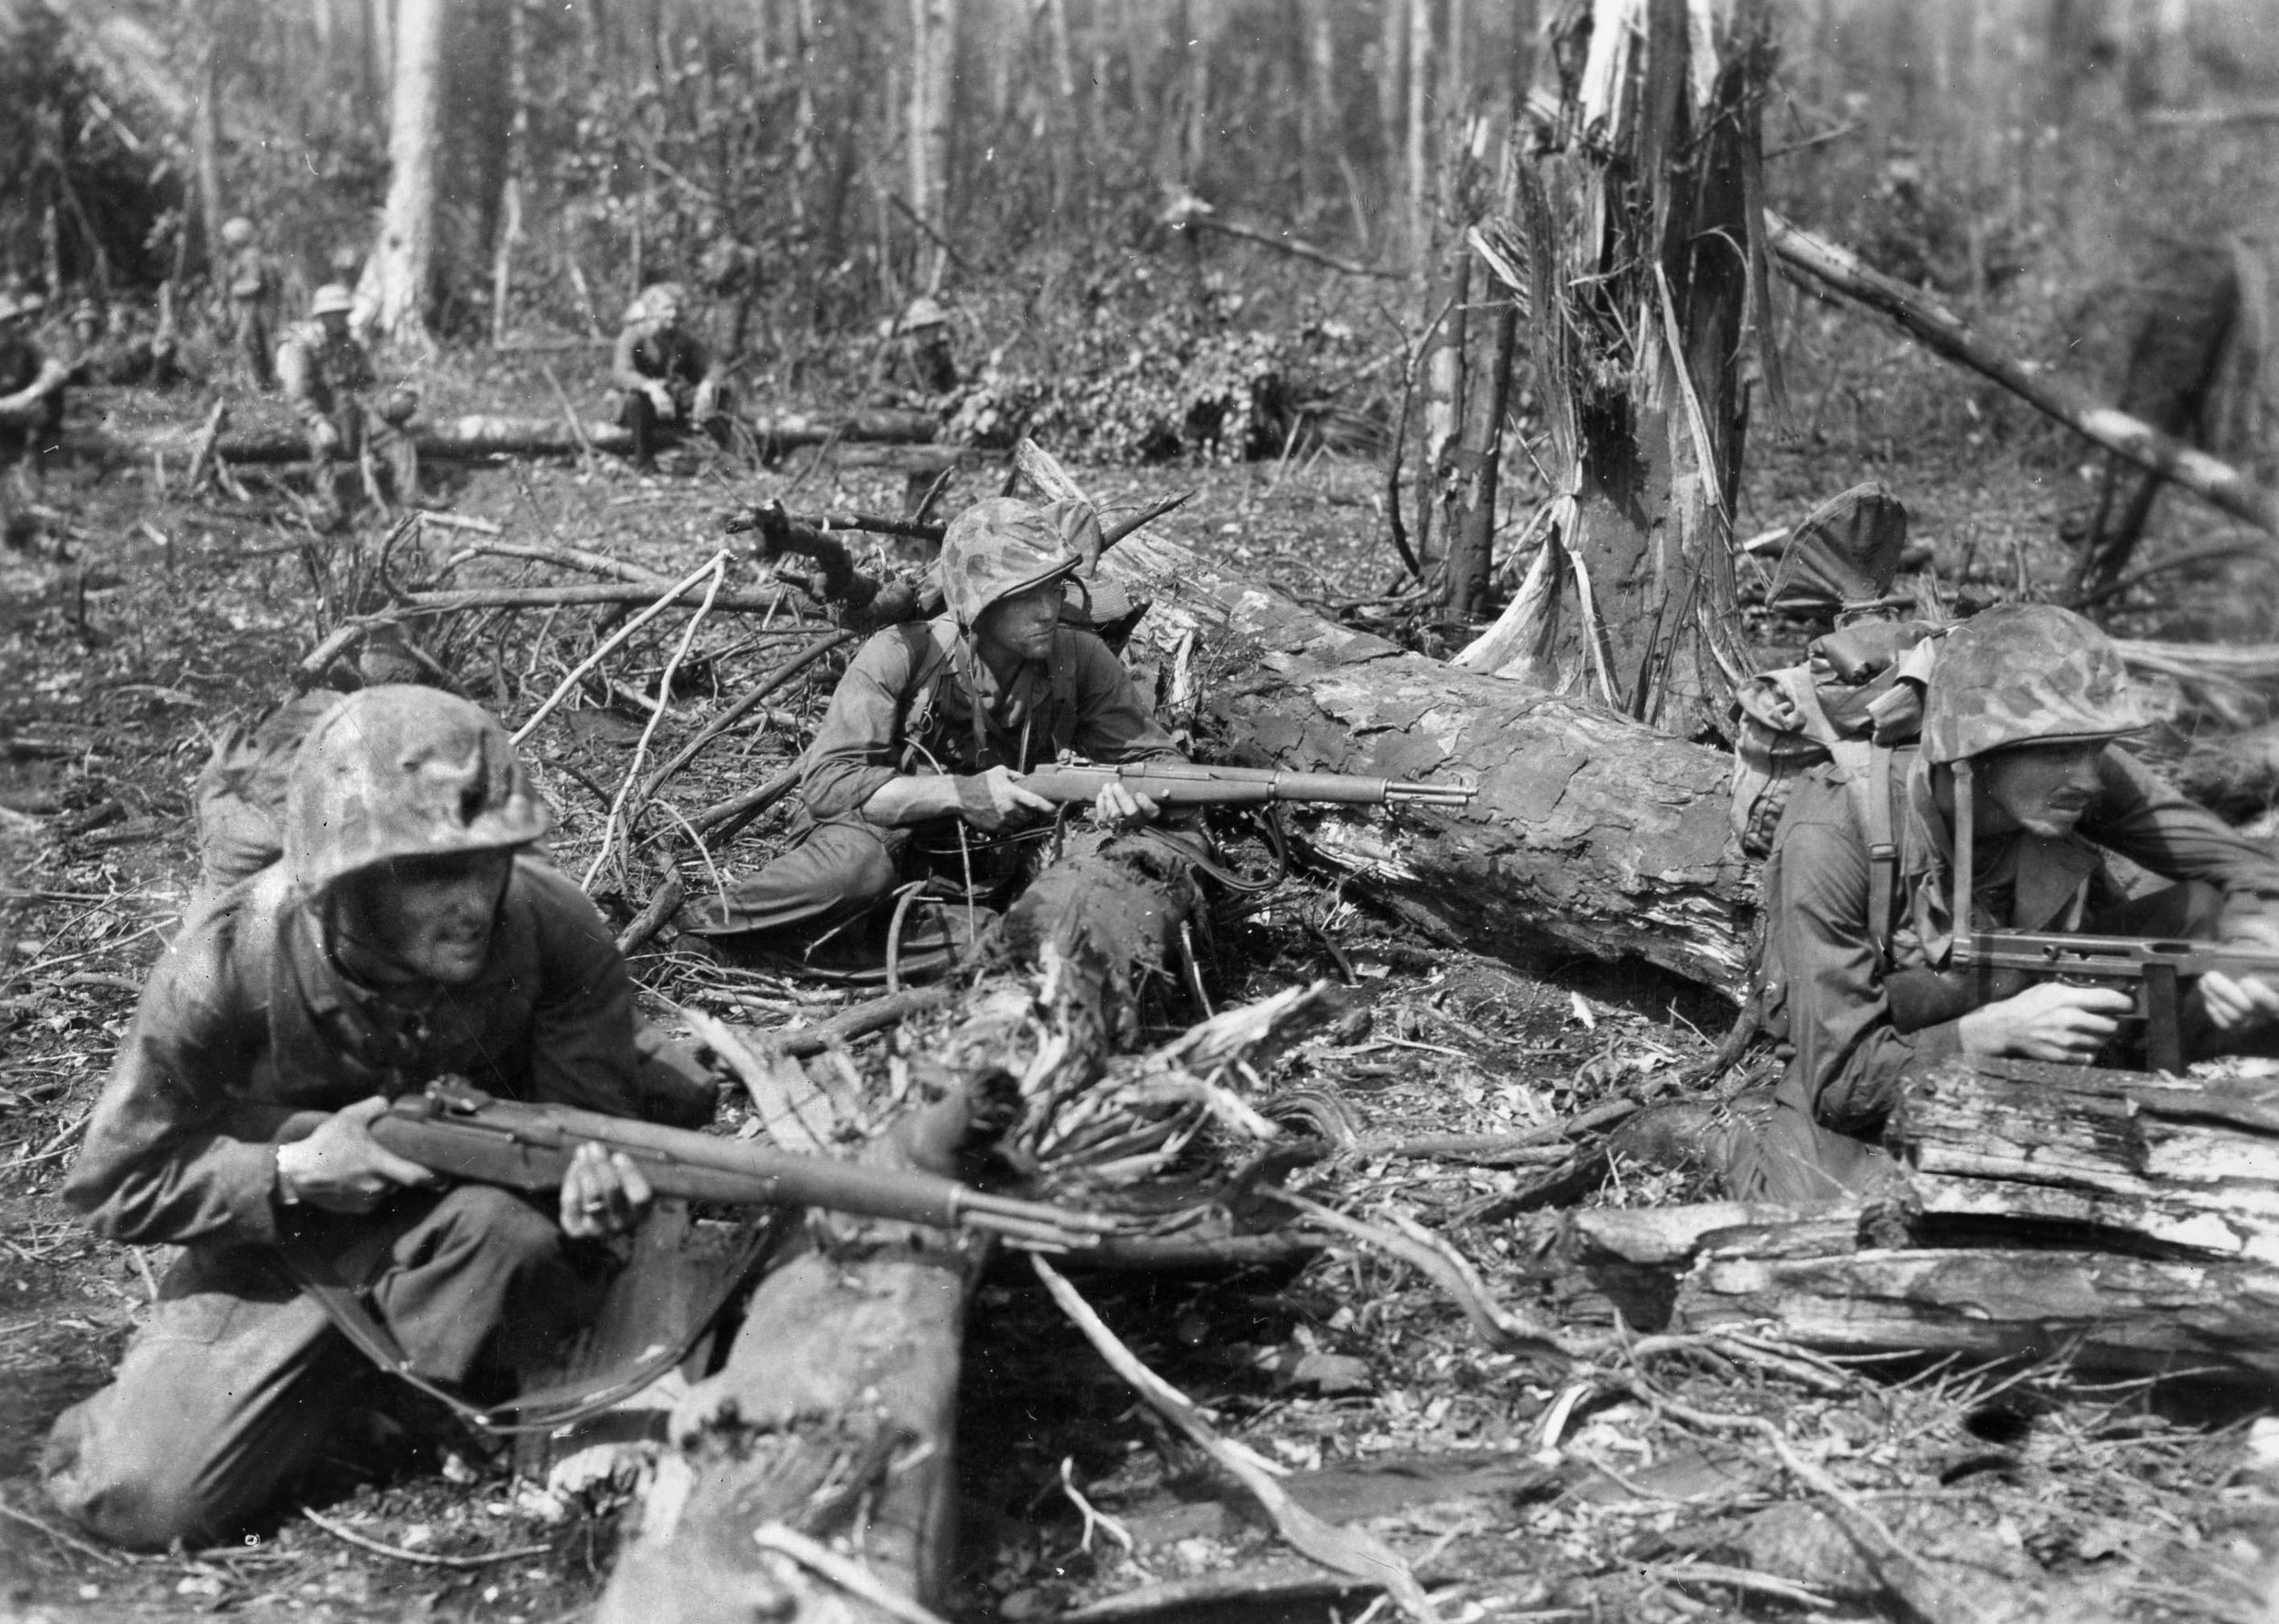 During action on the first day of fighting at Cape Gloucester, three U.S. Marines take cover from Japanese fire among fallen palm trees. Two of the Marines are armed with M-1 rifles, while the man on the right carries a Thompson submachine gun.